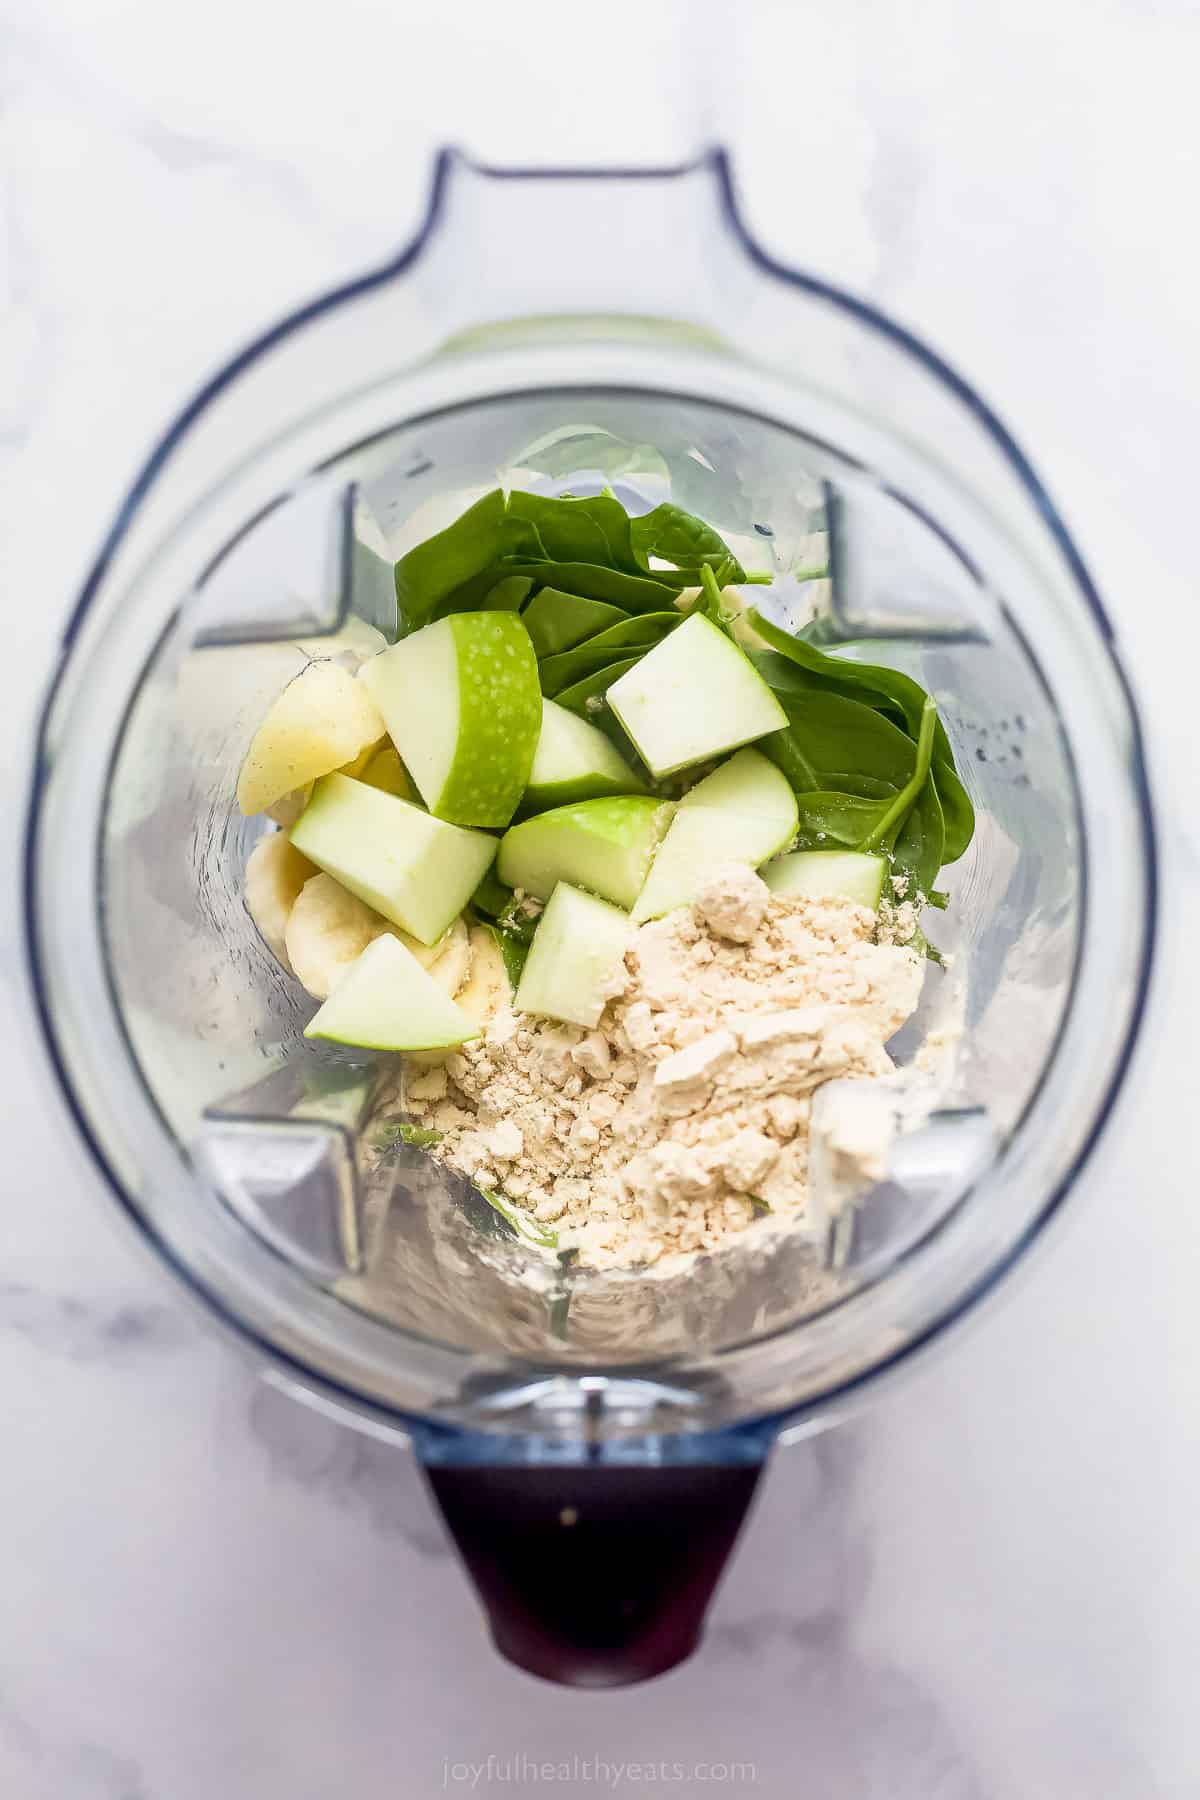 diced apples, spinach, and protein powder in a blender